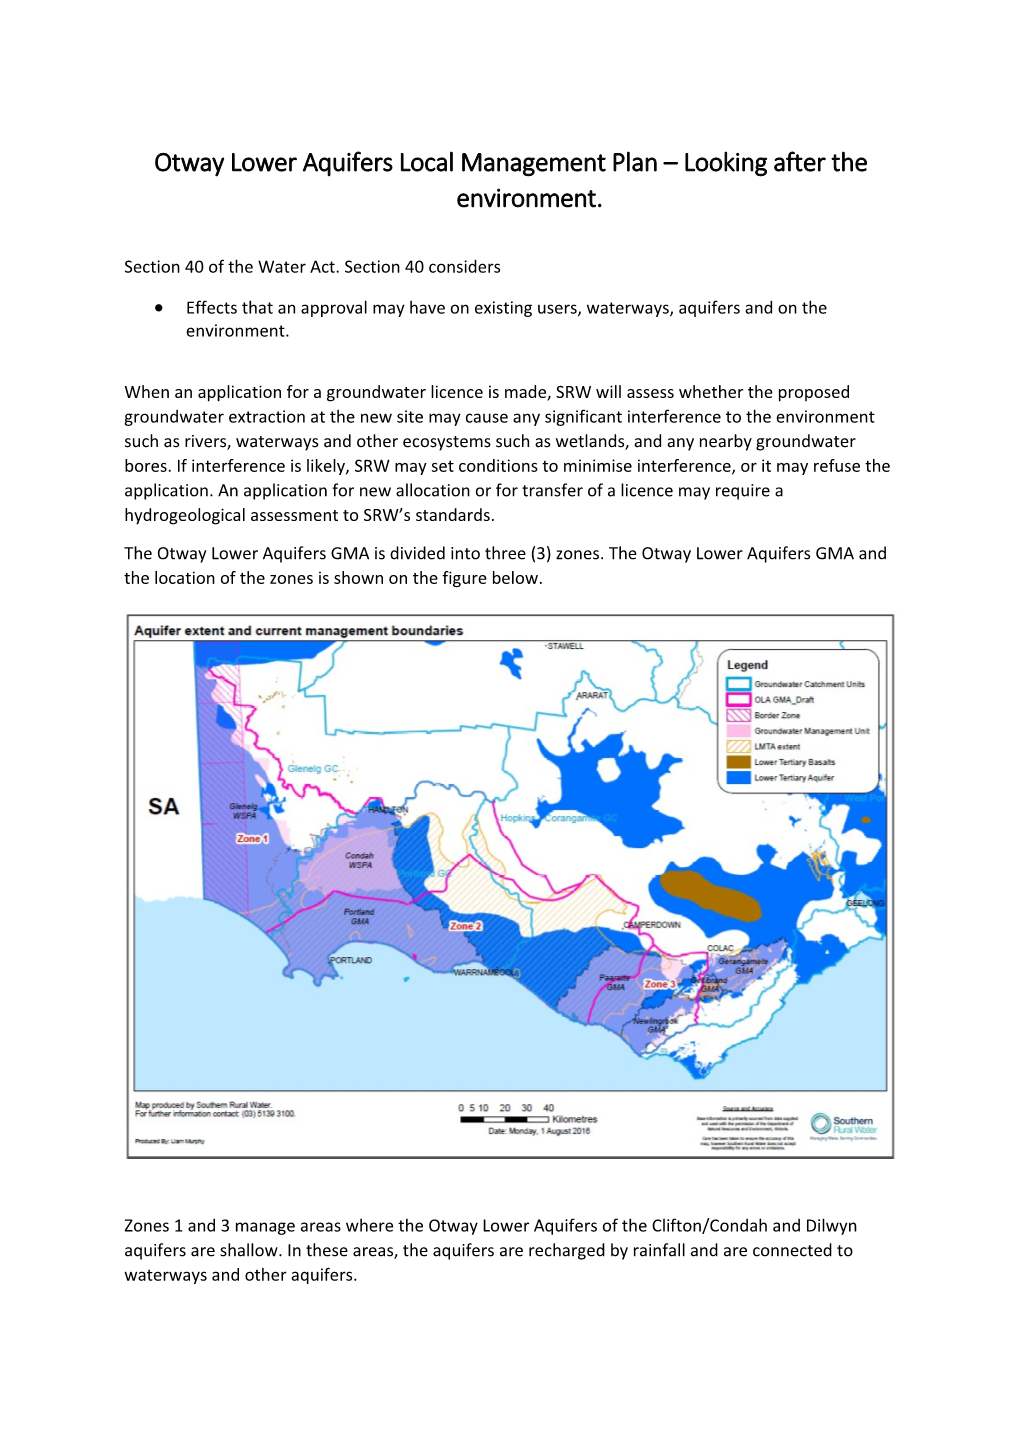 Otway Lower Aquifers Local Management Plan Looking After the Environment